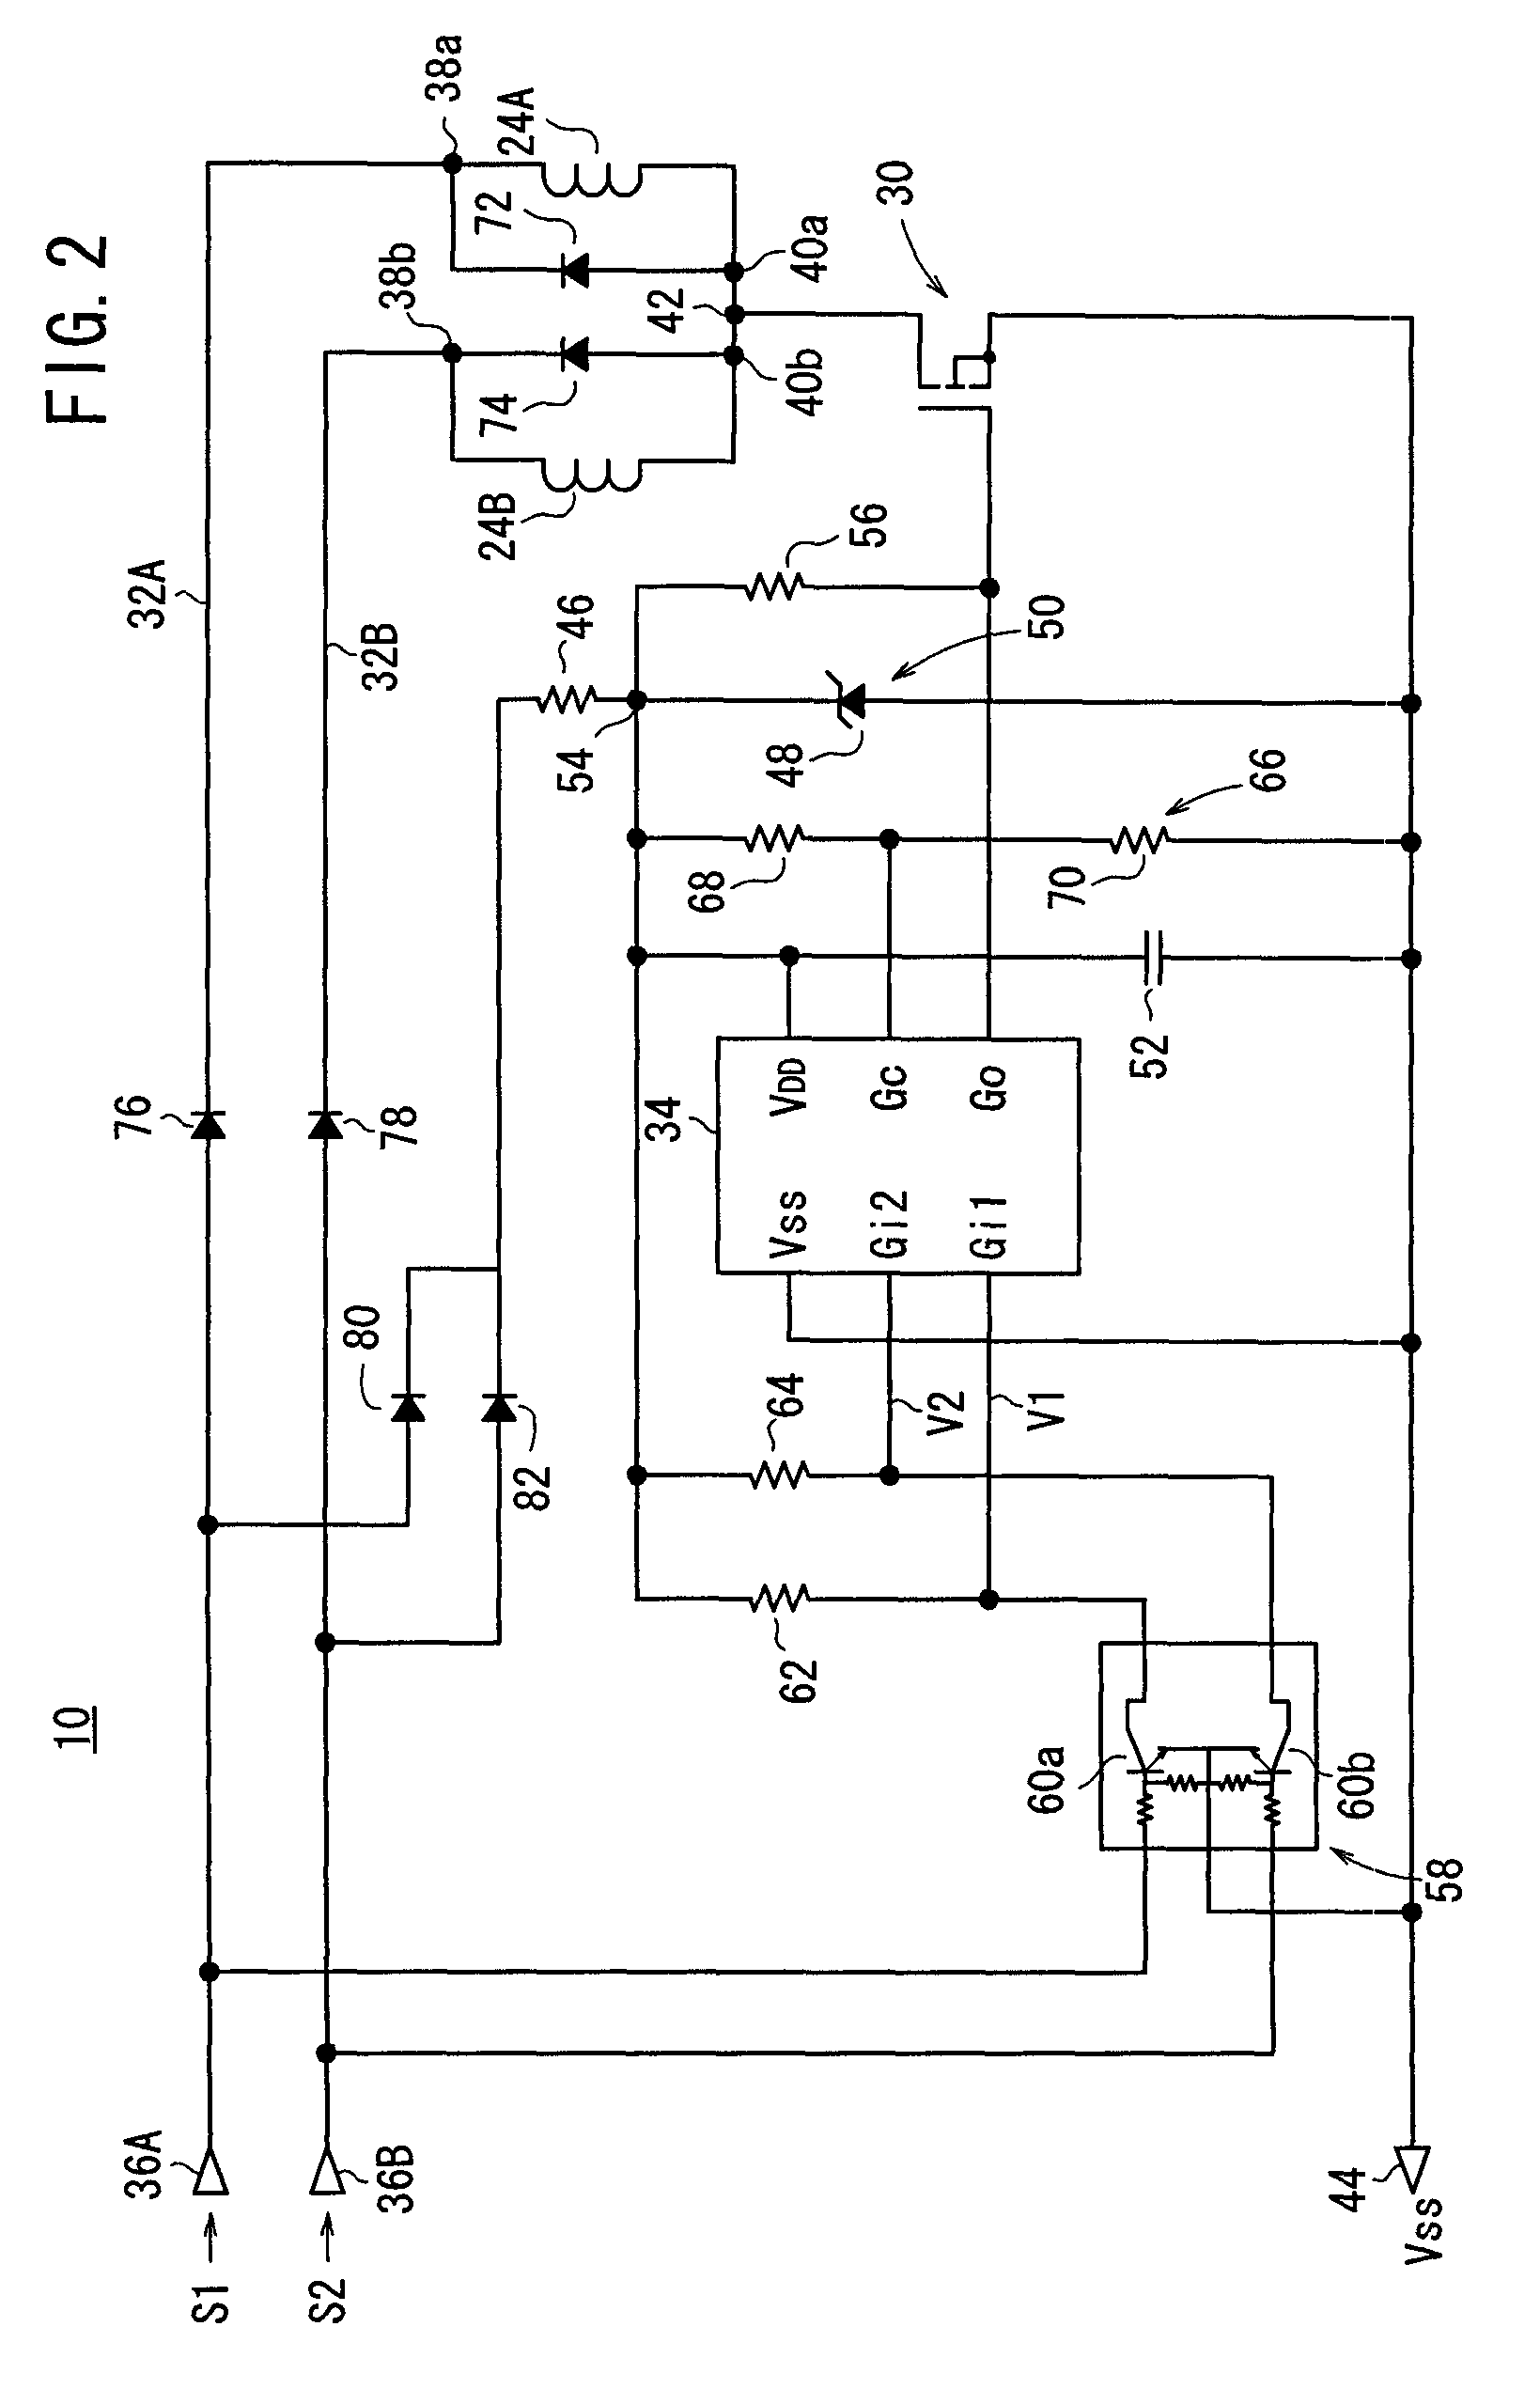 Solenoid-operated valve controller